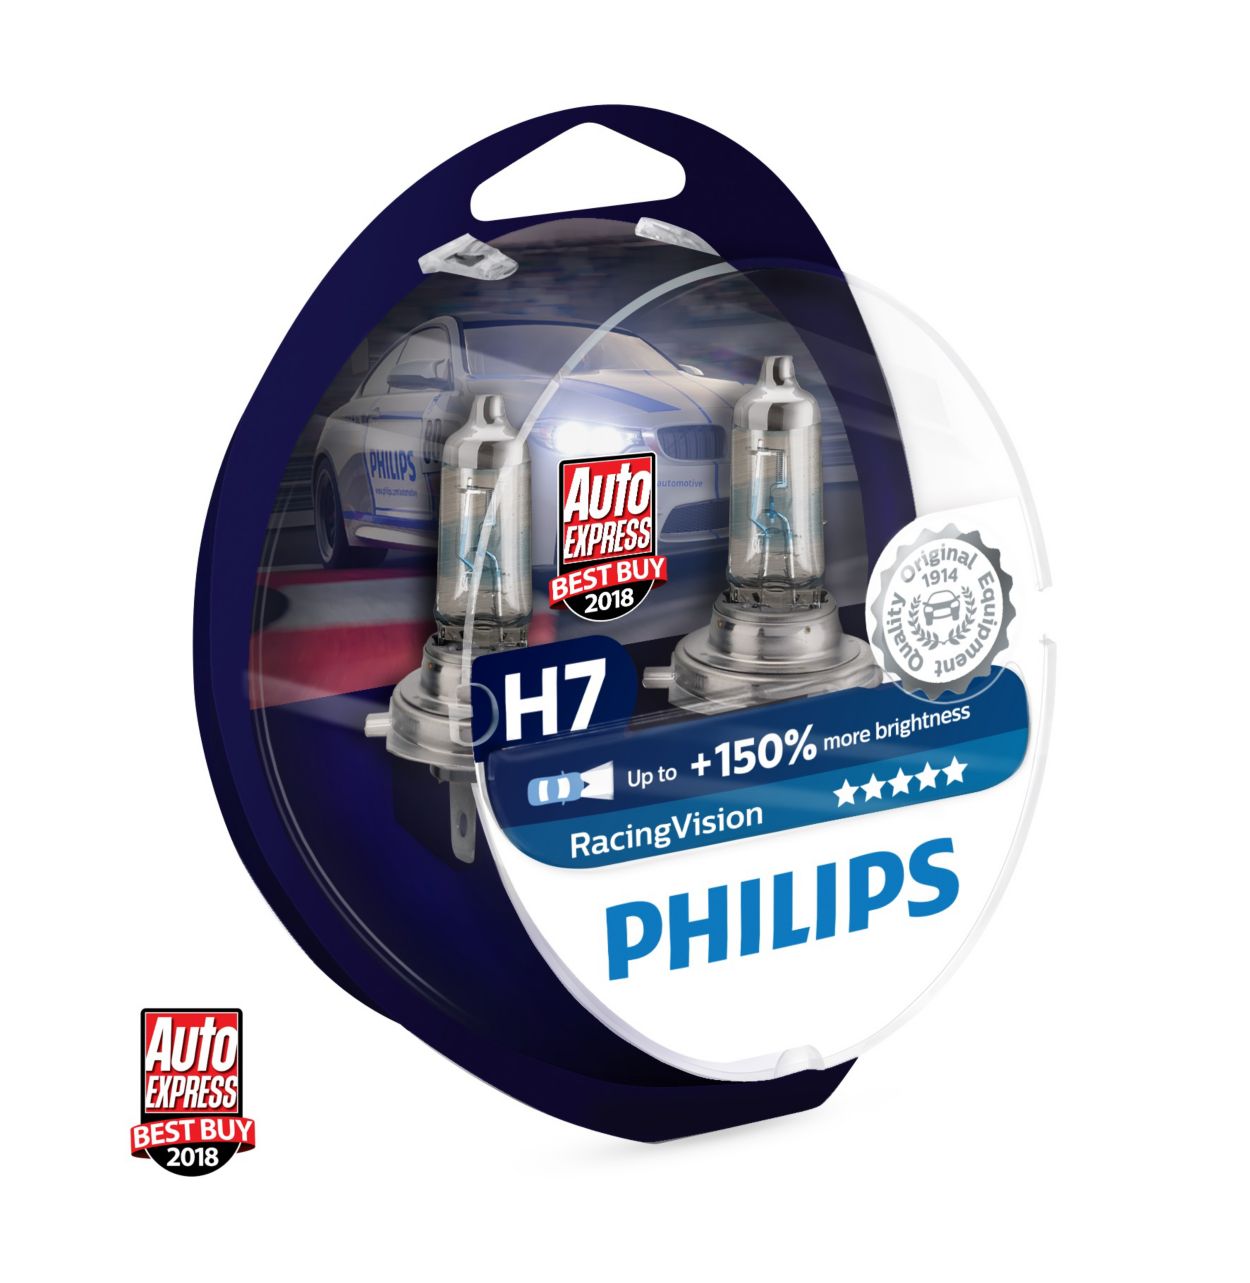 https://images.philips.com/is/image/philipsconsumer/1ced28df413d4800b745afac00f43df9?$jpglarge$&wid=1250